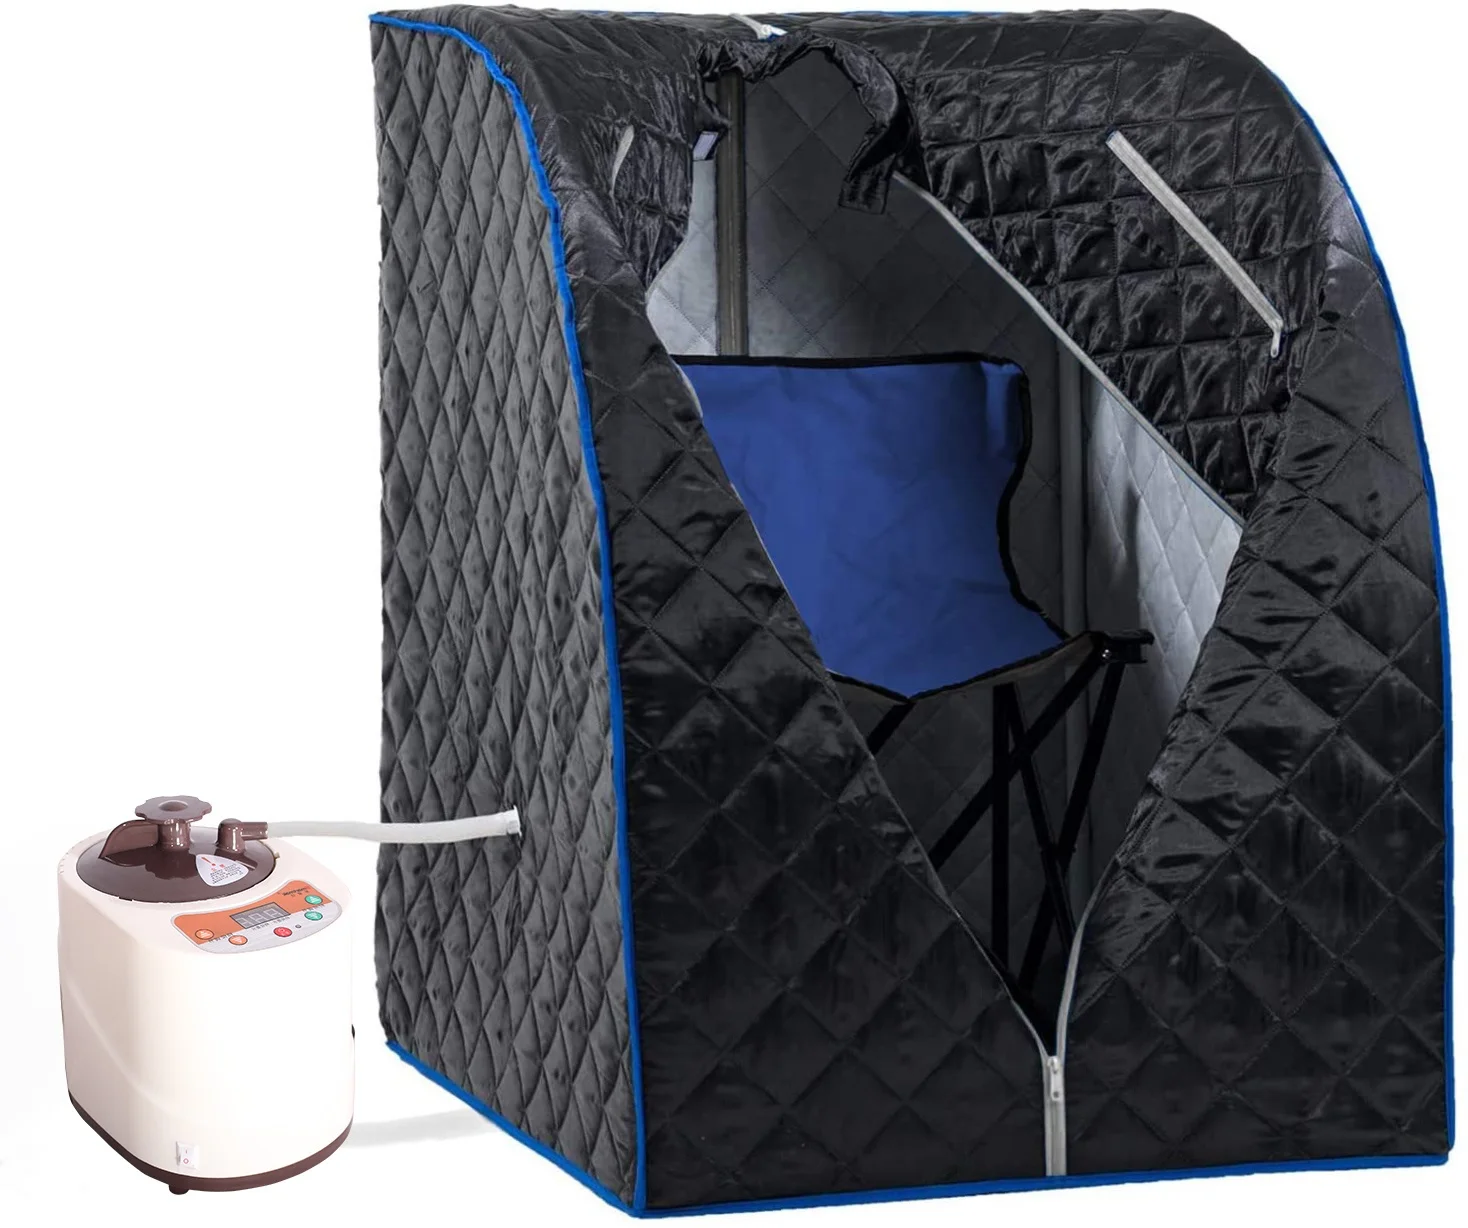 

Portable wet steam sauna tent ozone therapy home sauna spa with best quality, Brown,blue,pink,sliver,black